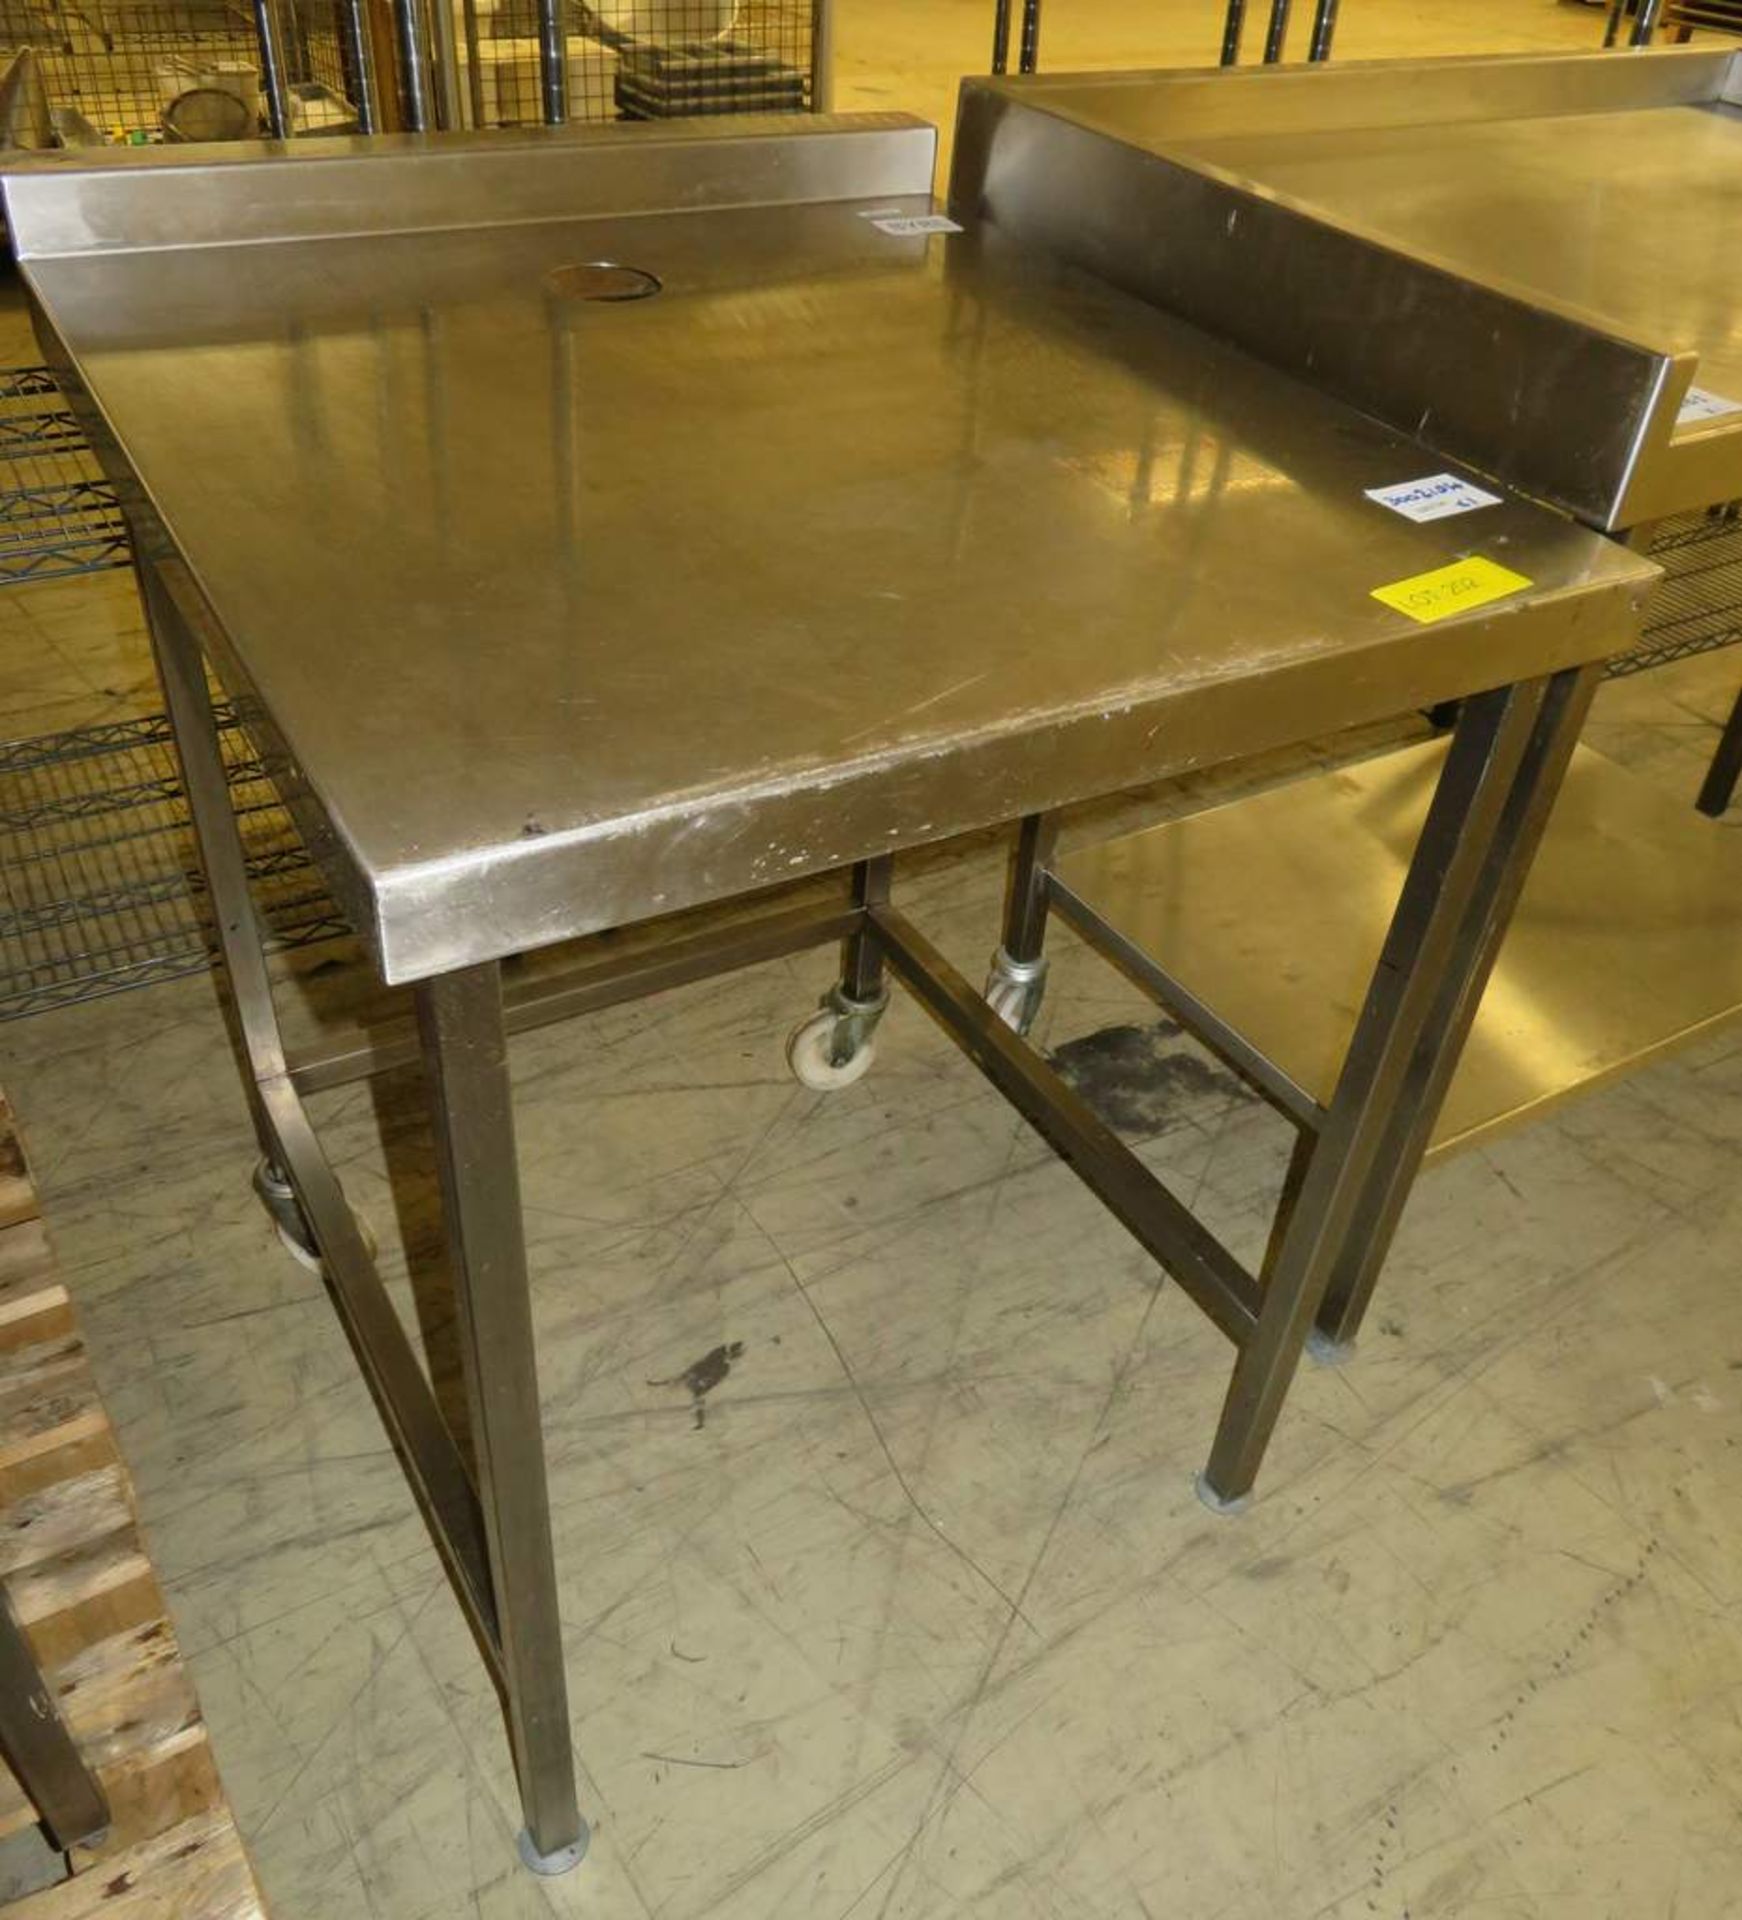 Stainless steel preperation Table/Appliance Stand - Image 3 of 3